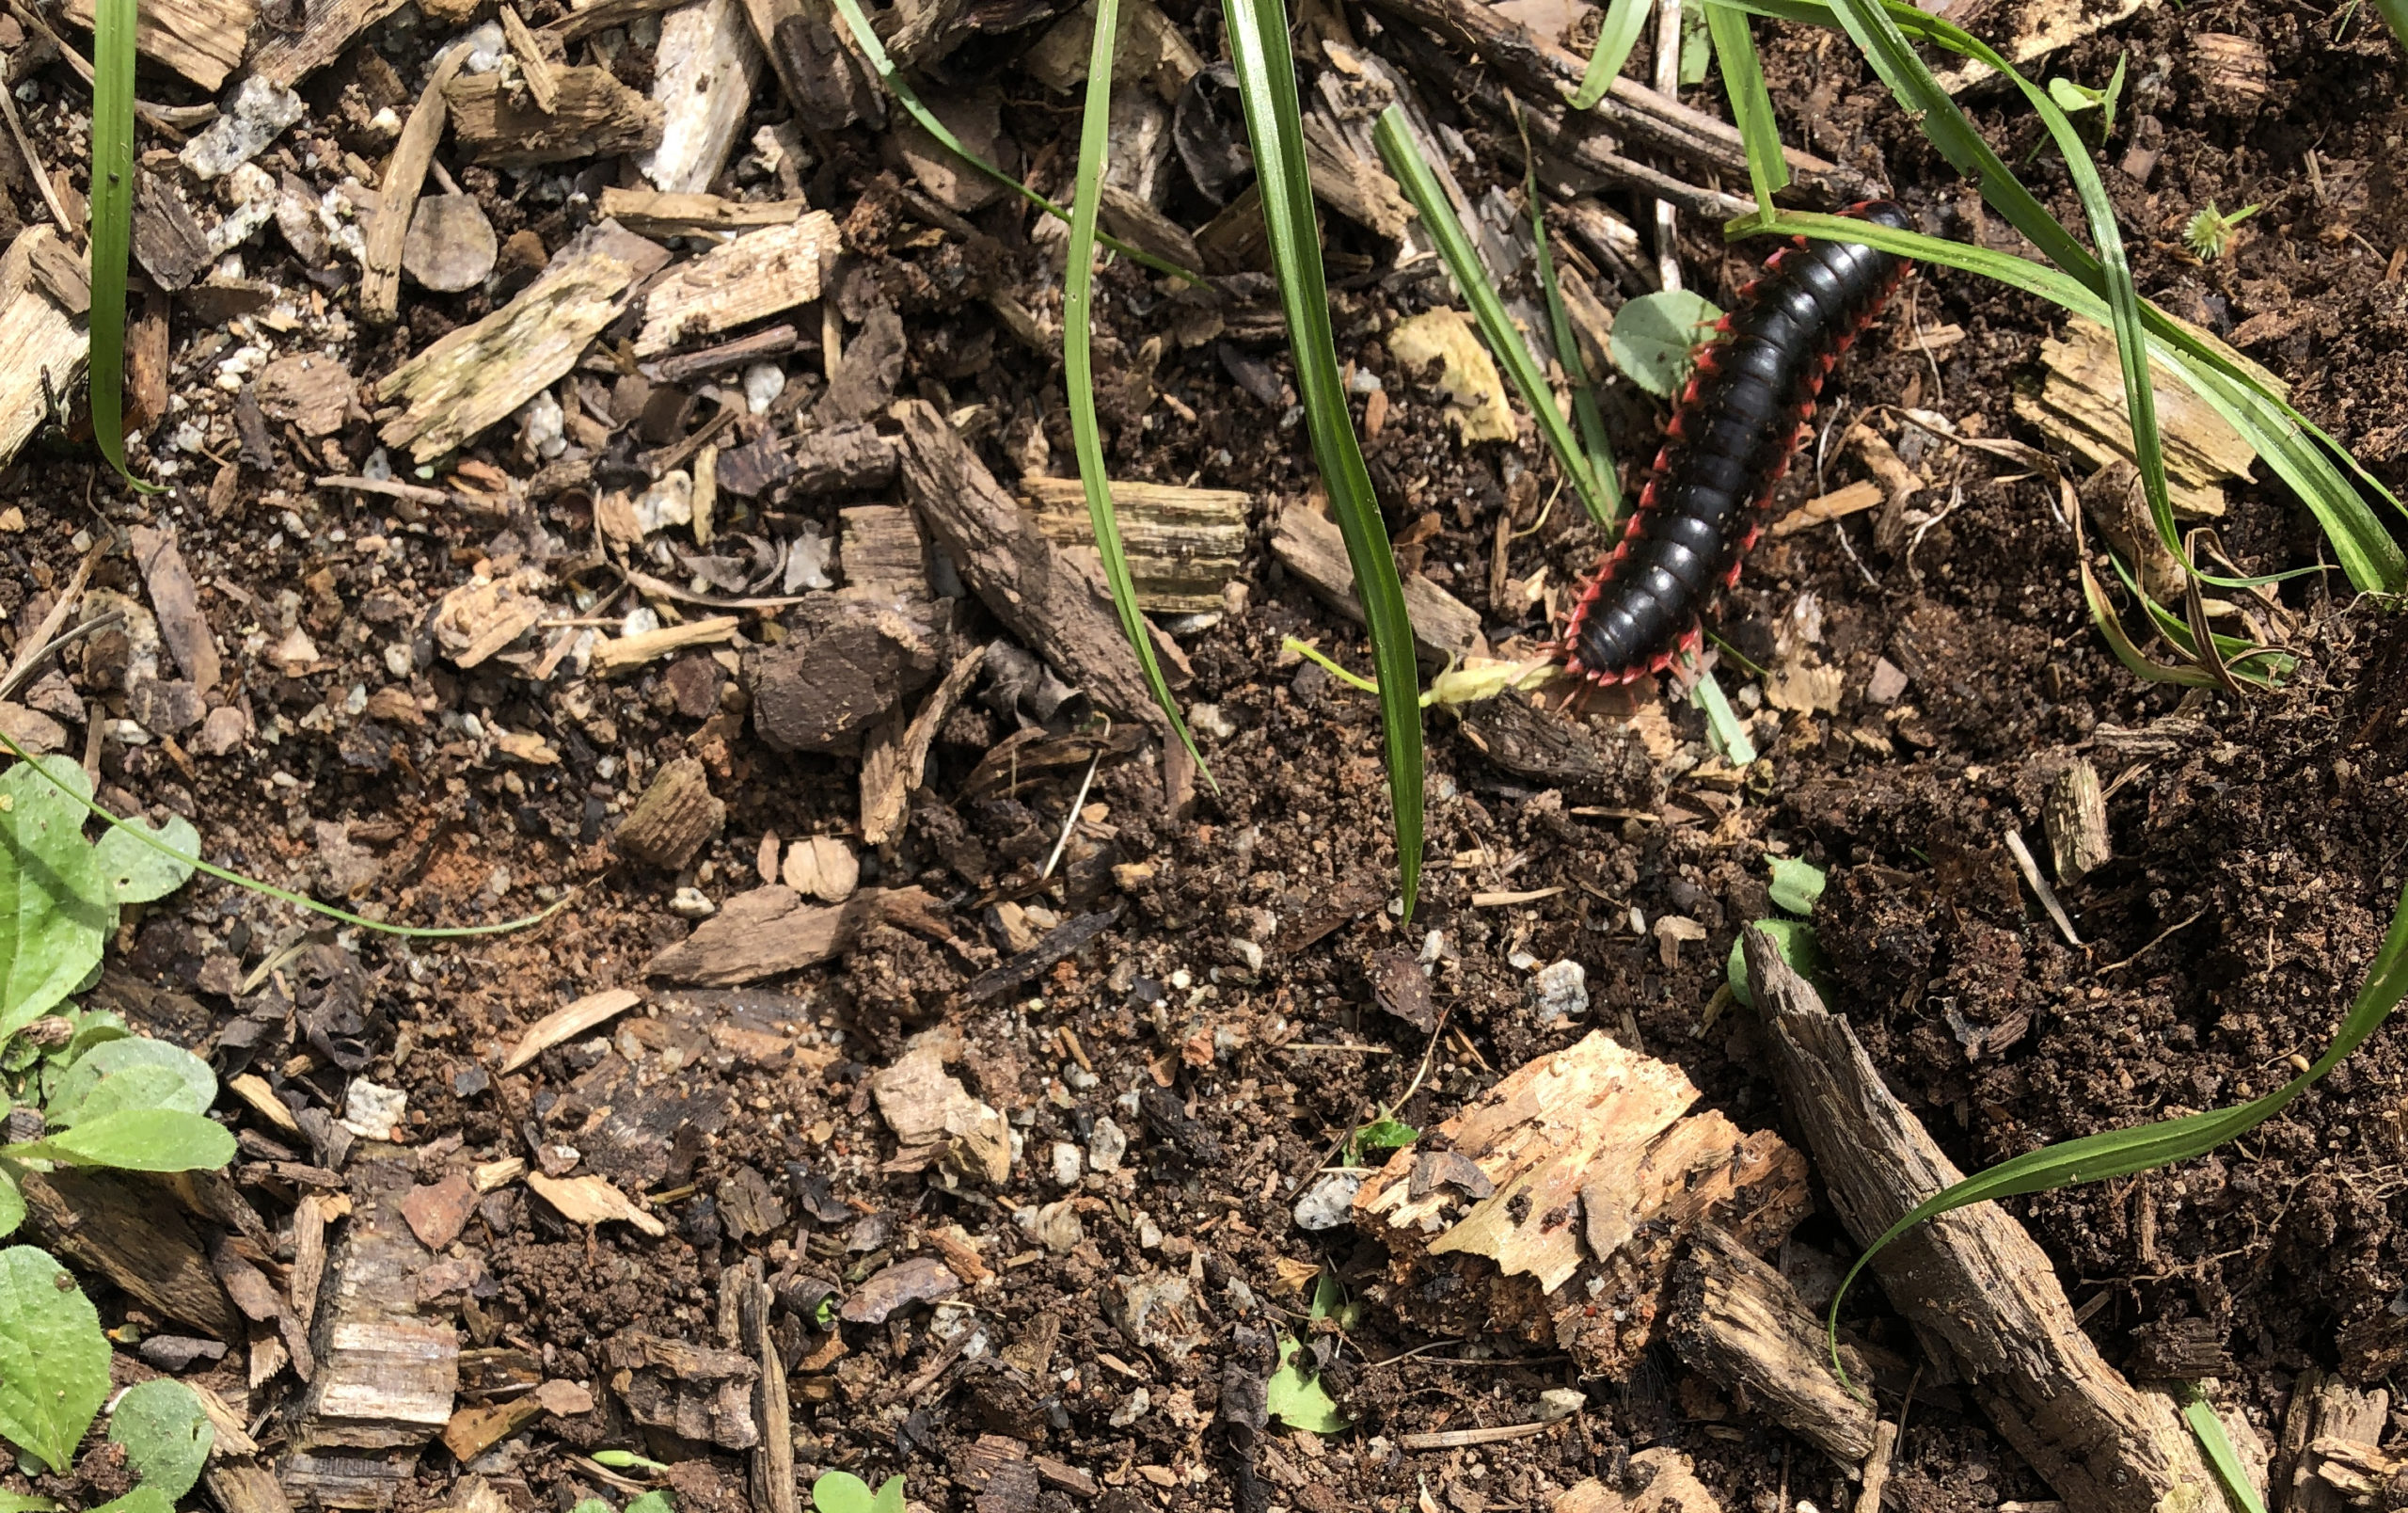 Healthy soil is the basis of a fertile ecosystem. Moist, compost-enriched soils attract beneficial decomposers like this Georgia flat-backed millipede.